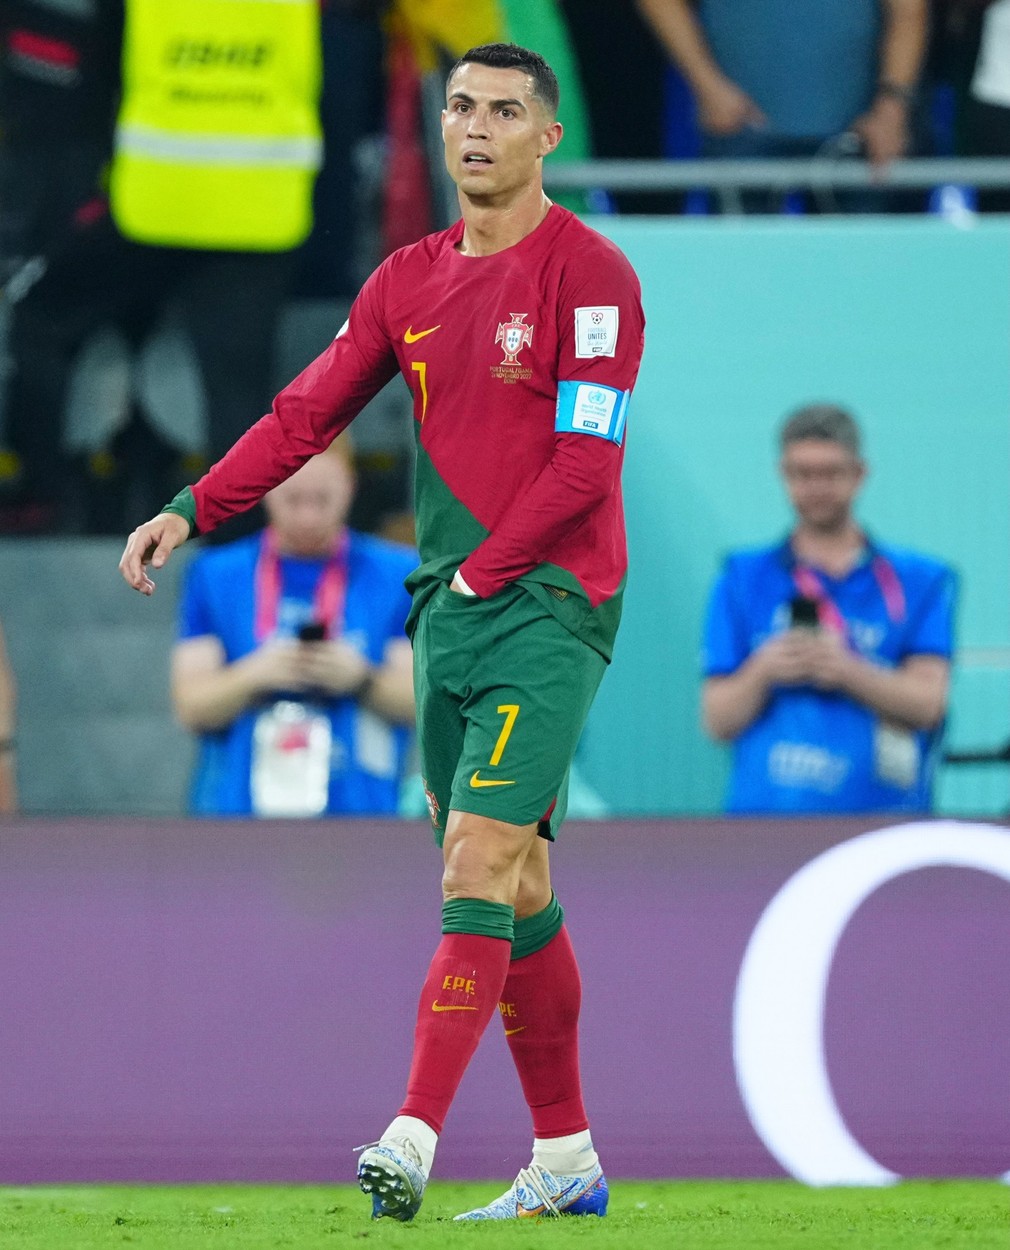 Cristiano Ronaldo of Portugal
Portugal v Ghana, FIFA World Cup 2022, Group H, Football, Stadium 974, Doha, Qatar - 24 Nov 2022,Image: 740066619, License: Rights-managed, Restrictions: Editorial Use Only, Model Release: no